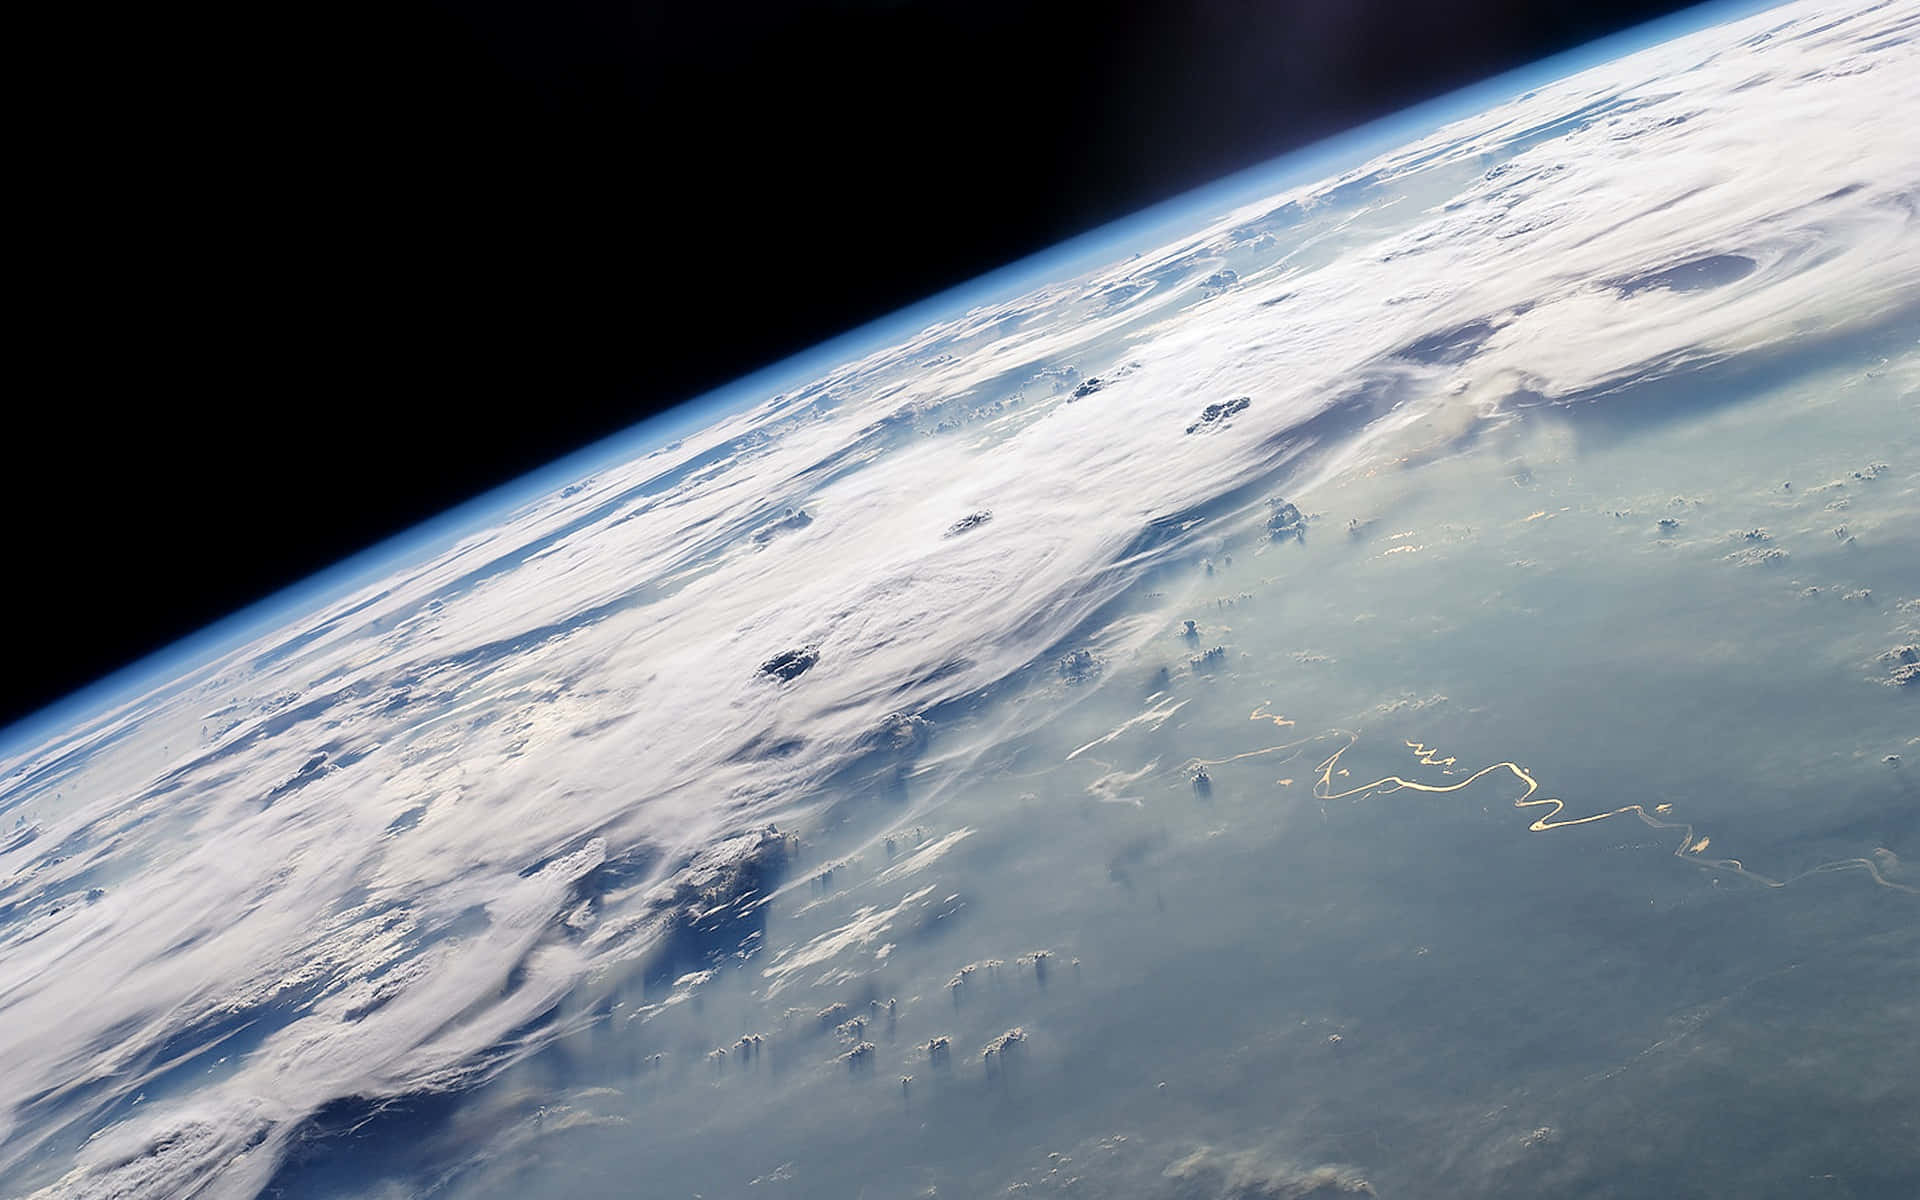 A striking view of our blue planet from afar. Wallpaper